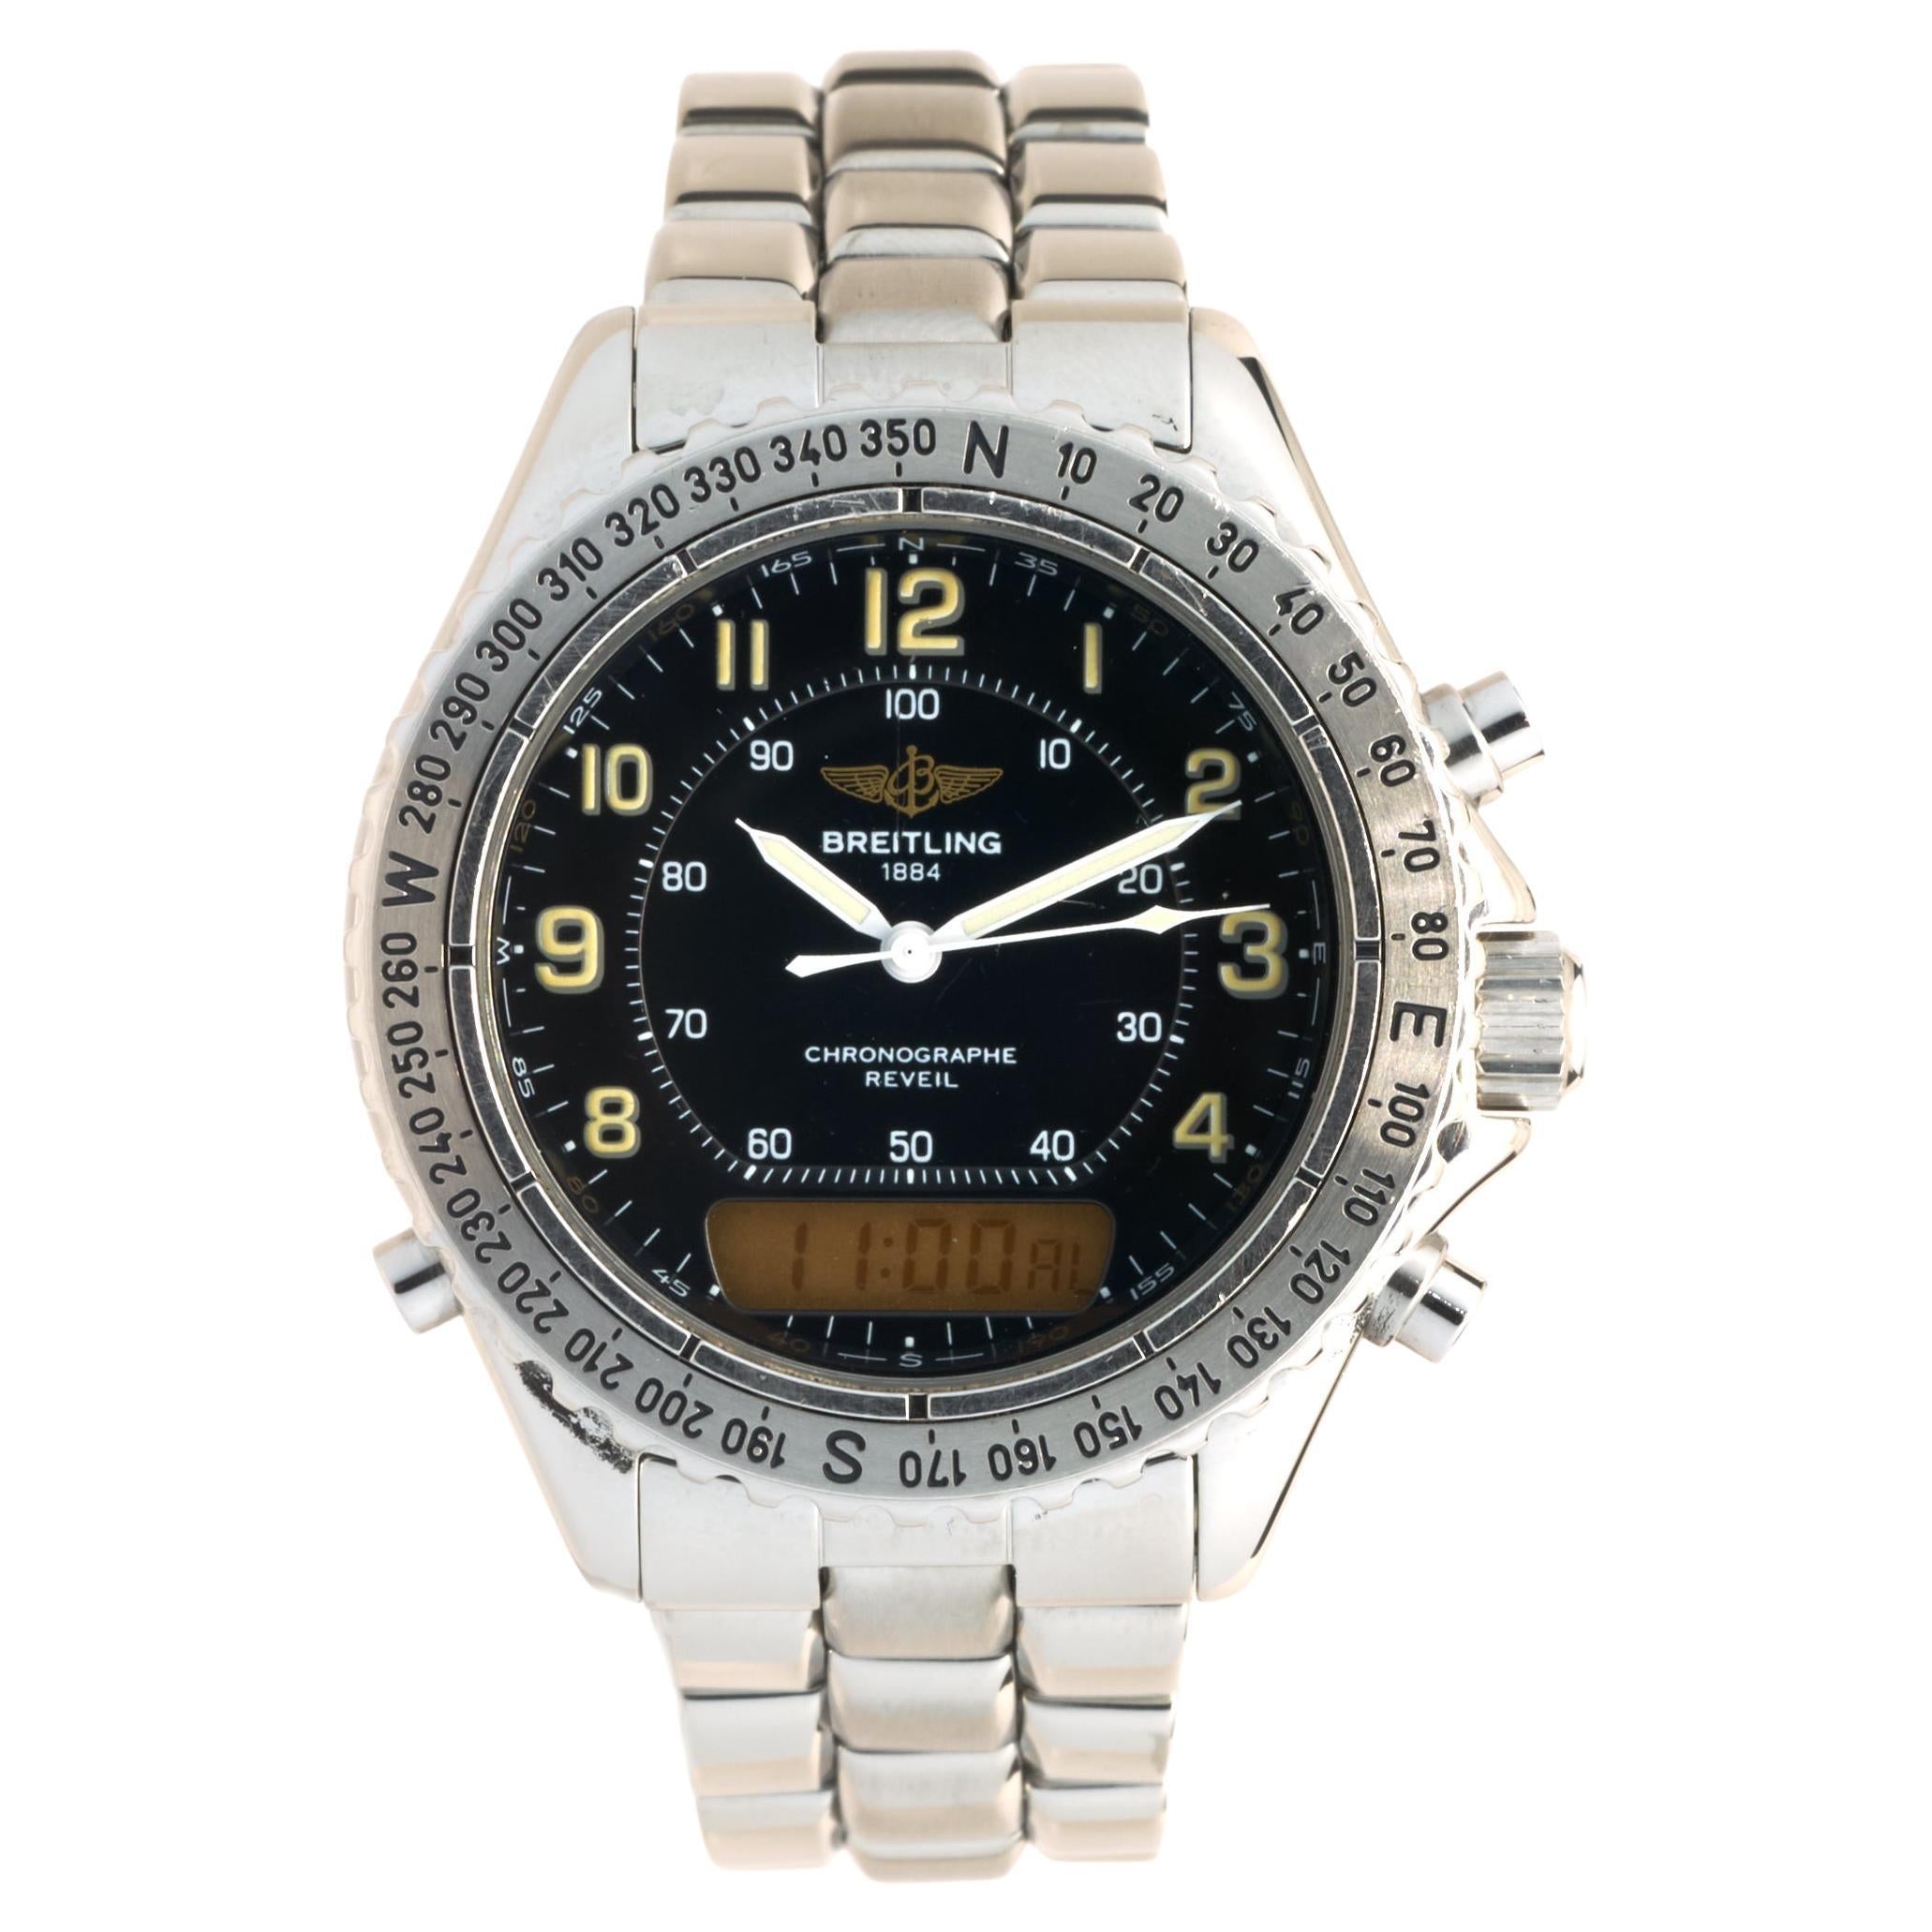 Breitling 1884 Watch - 3 For Sale on 1stDibs | breitling 1884 price,  breitling watches 1884 price, breitling 1884, اسعار